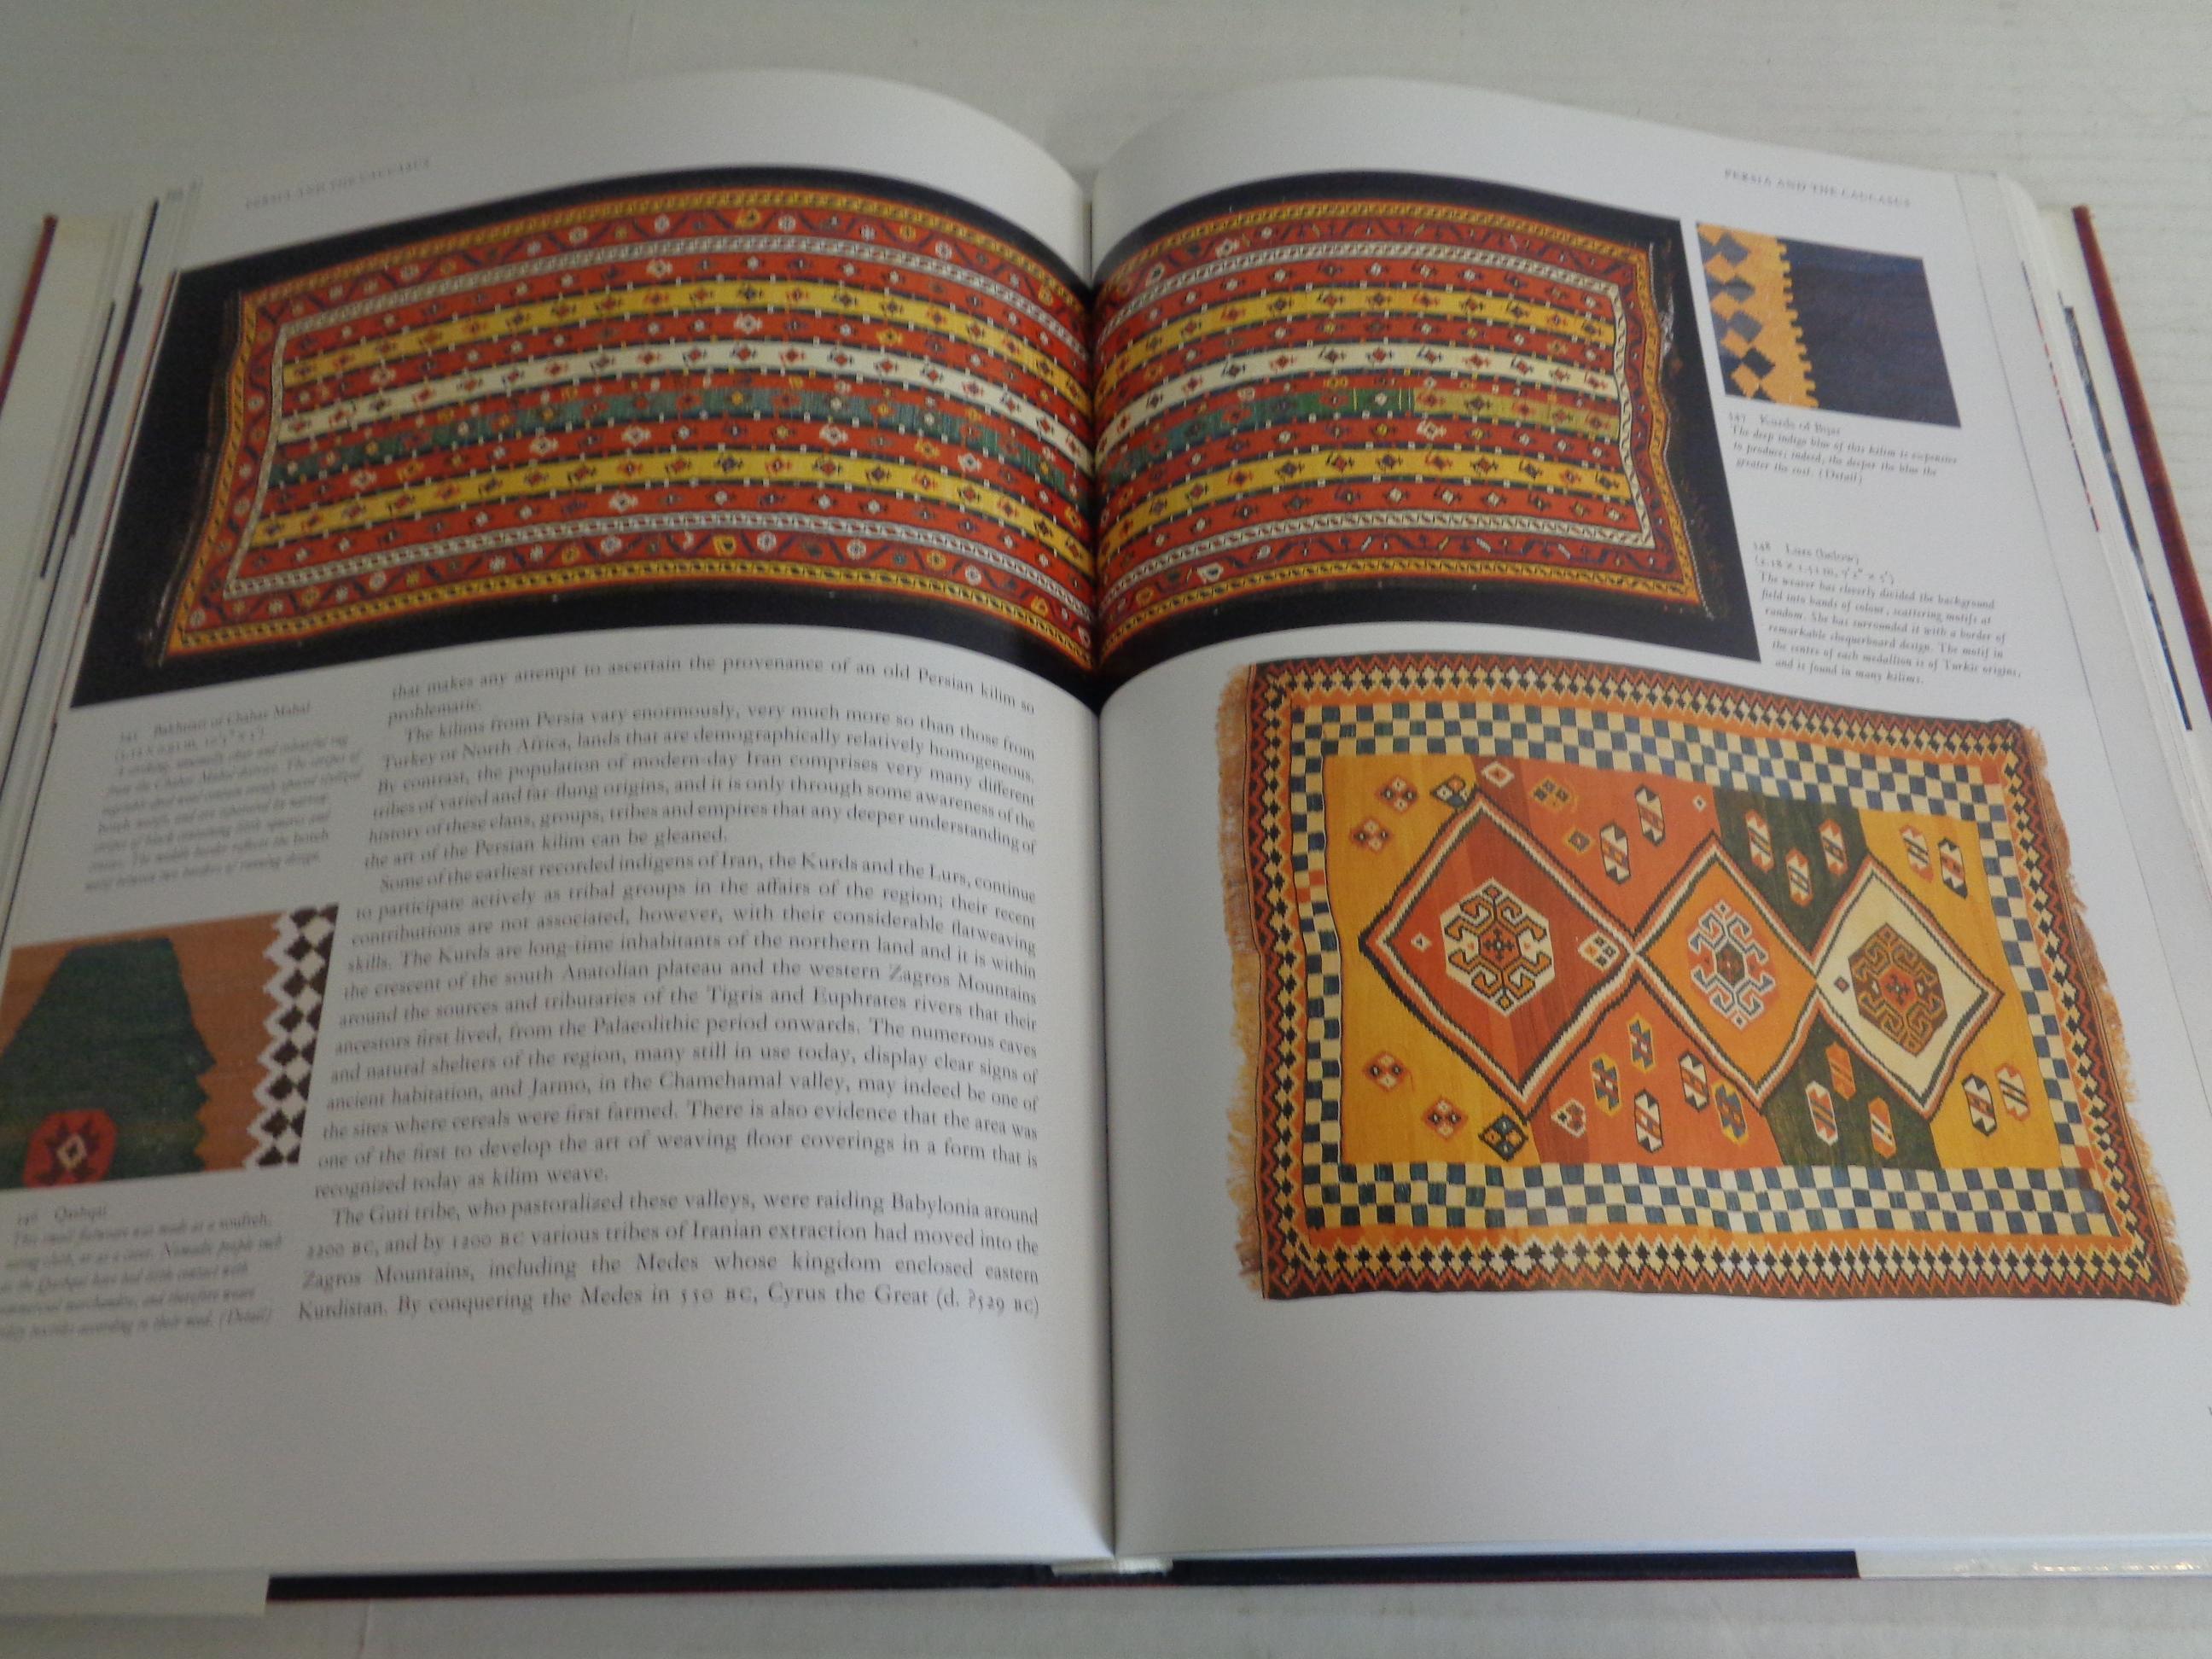 KILIM: The Complete Guide - 1993 Chronicle Books - 1st Edition For Sale 7